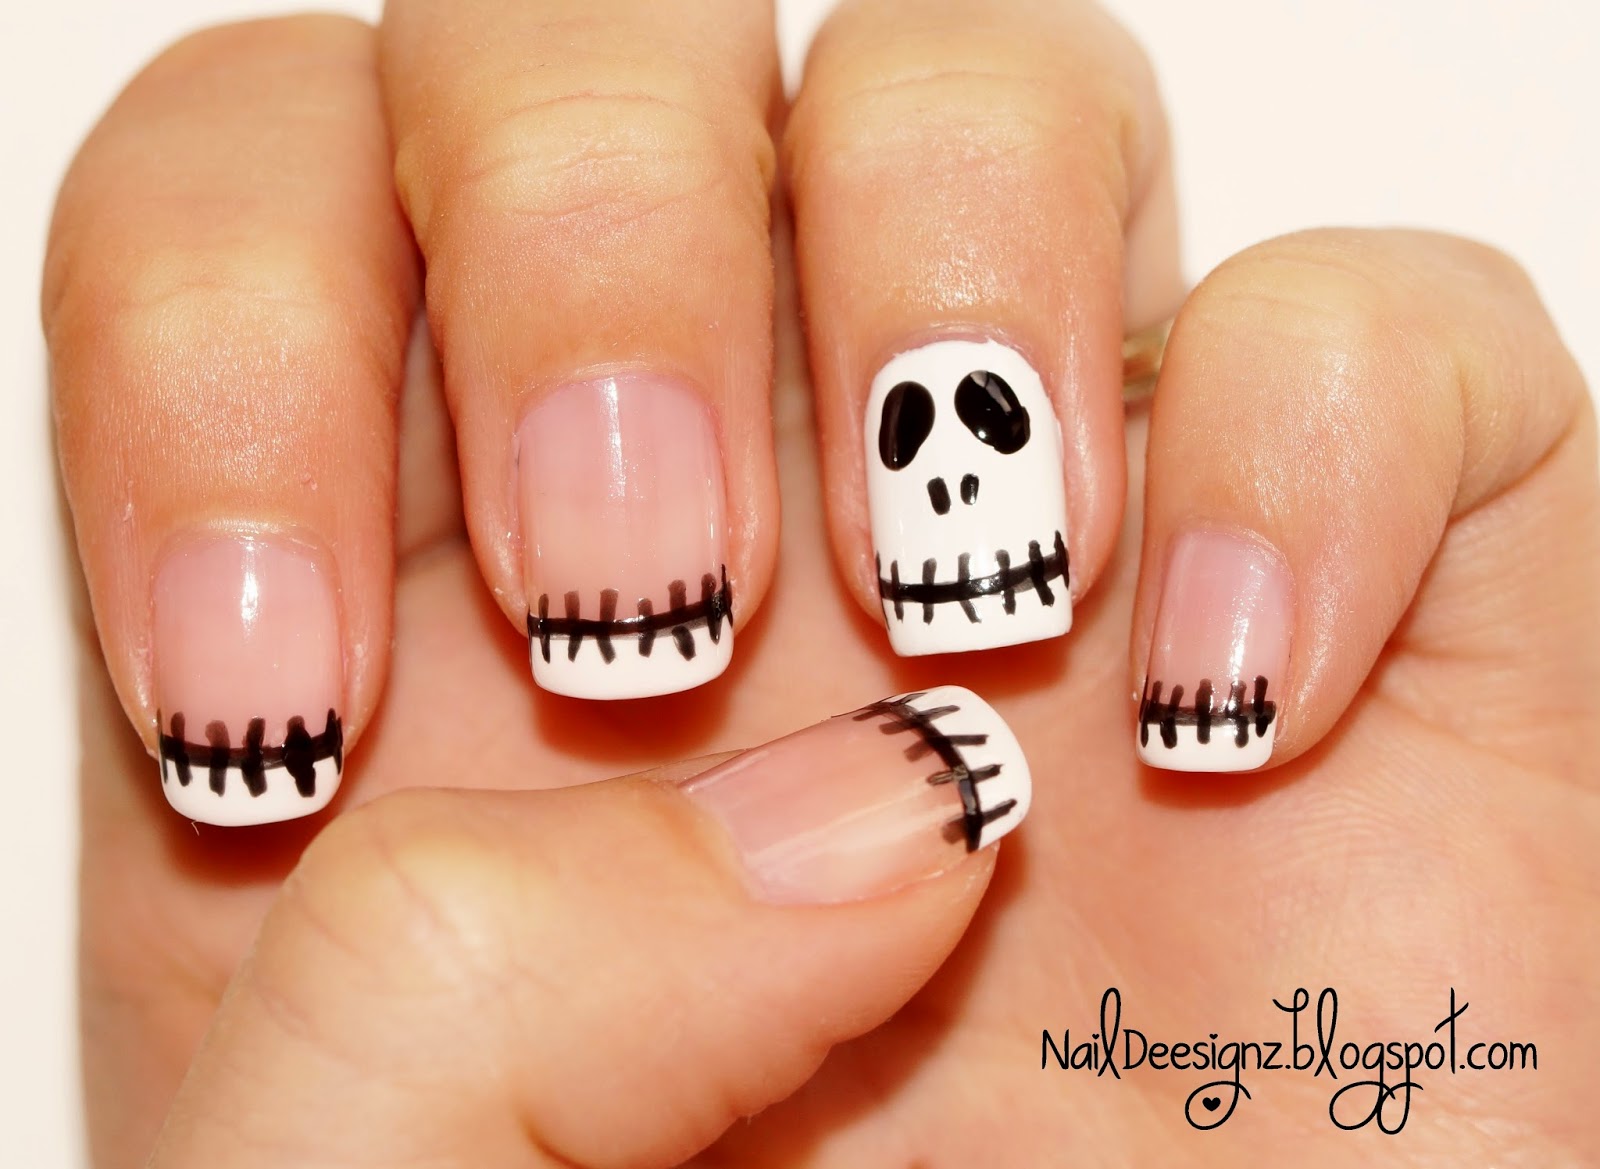 8. "Skeleton Nail Art for Spooky Nails" - wide 7